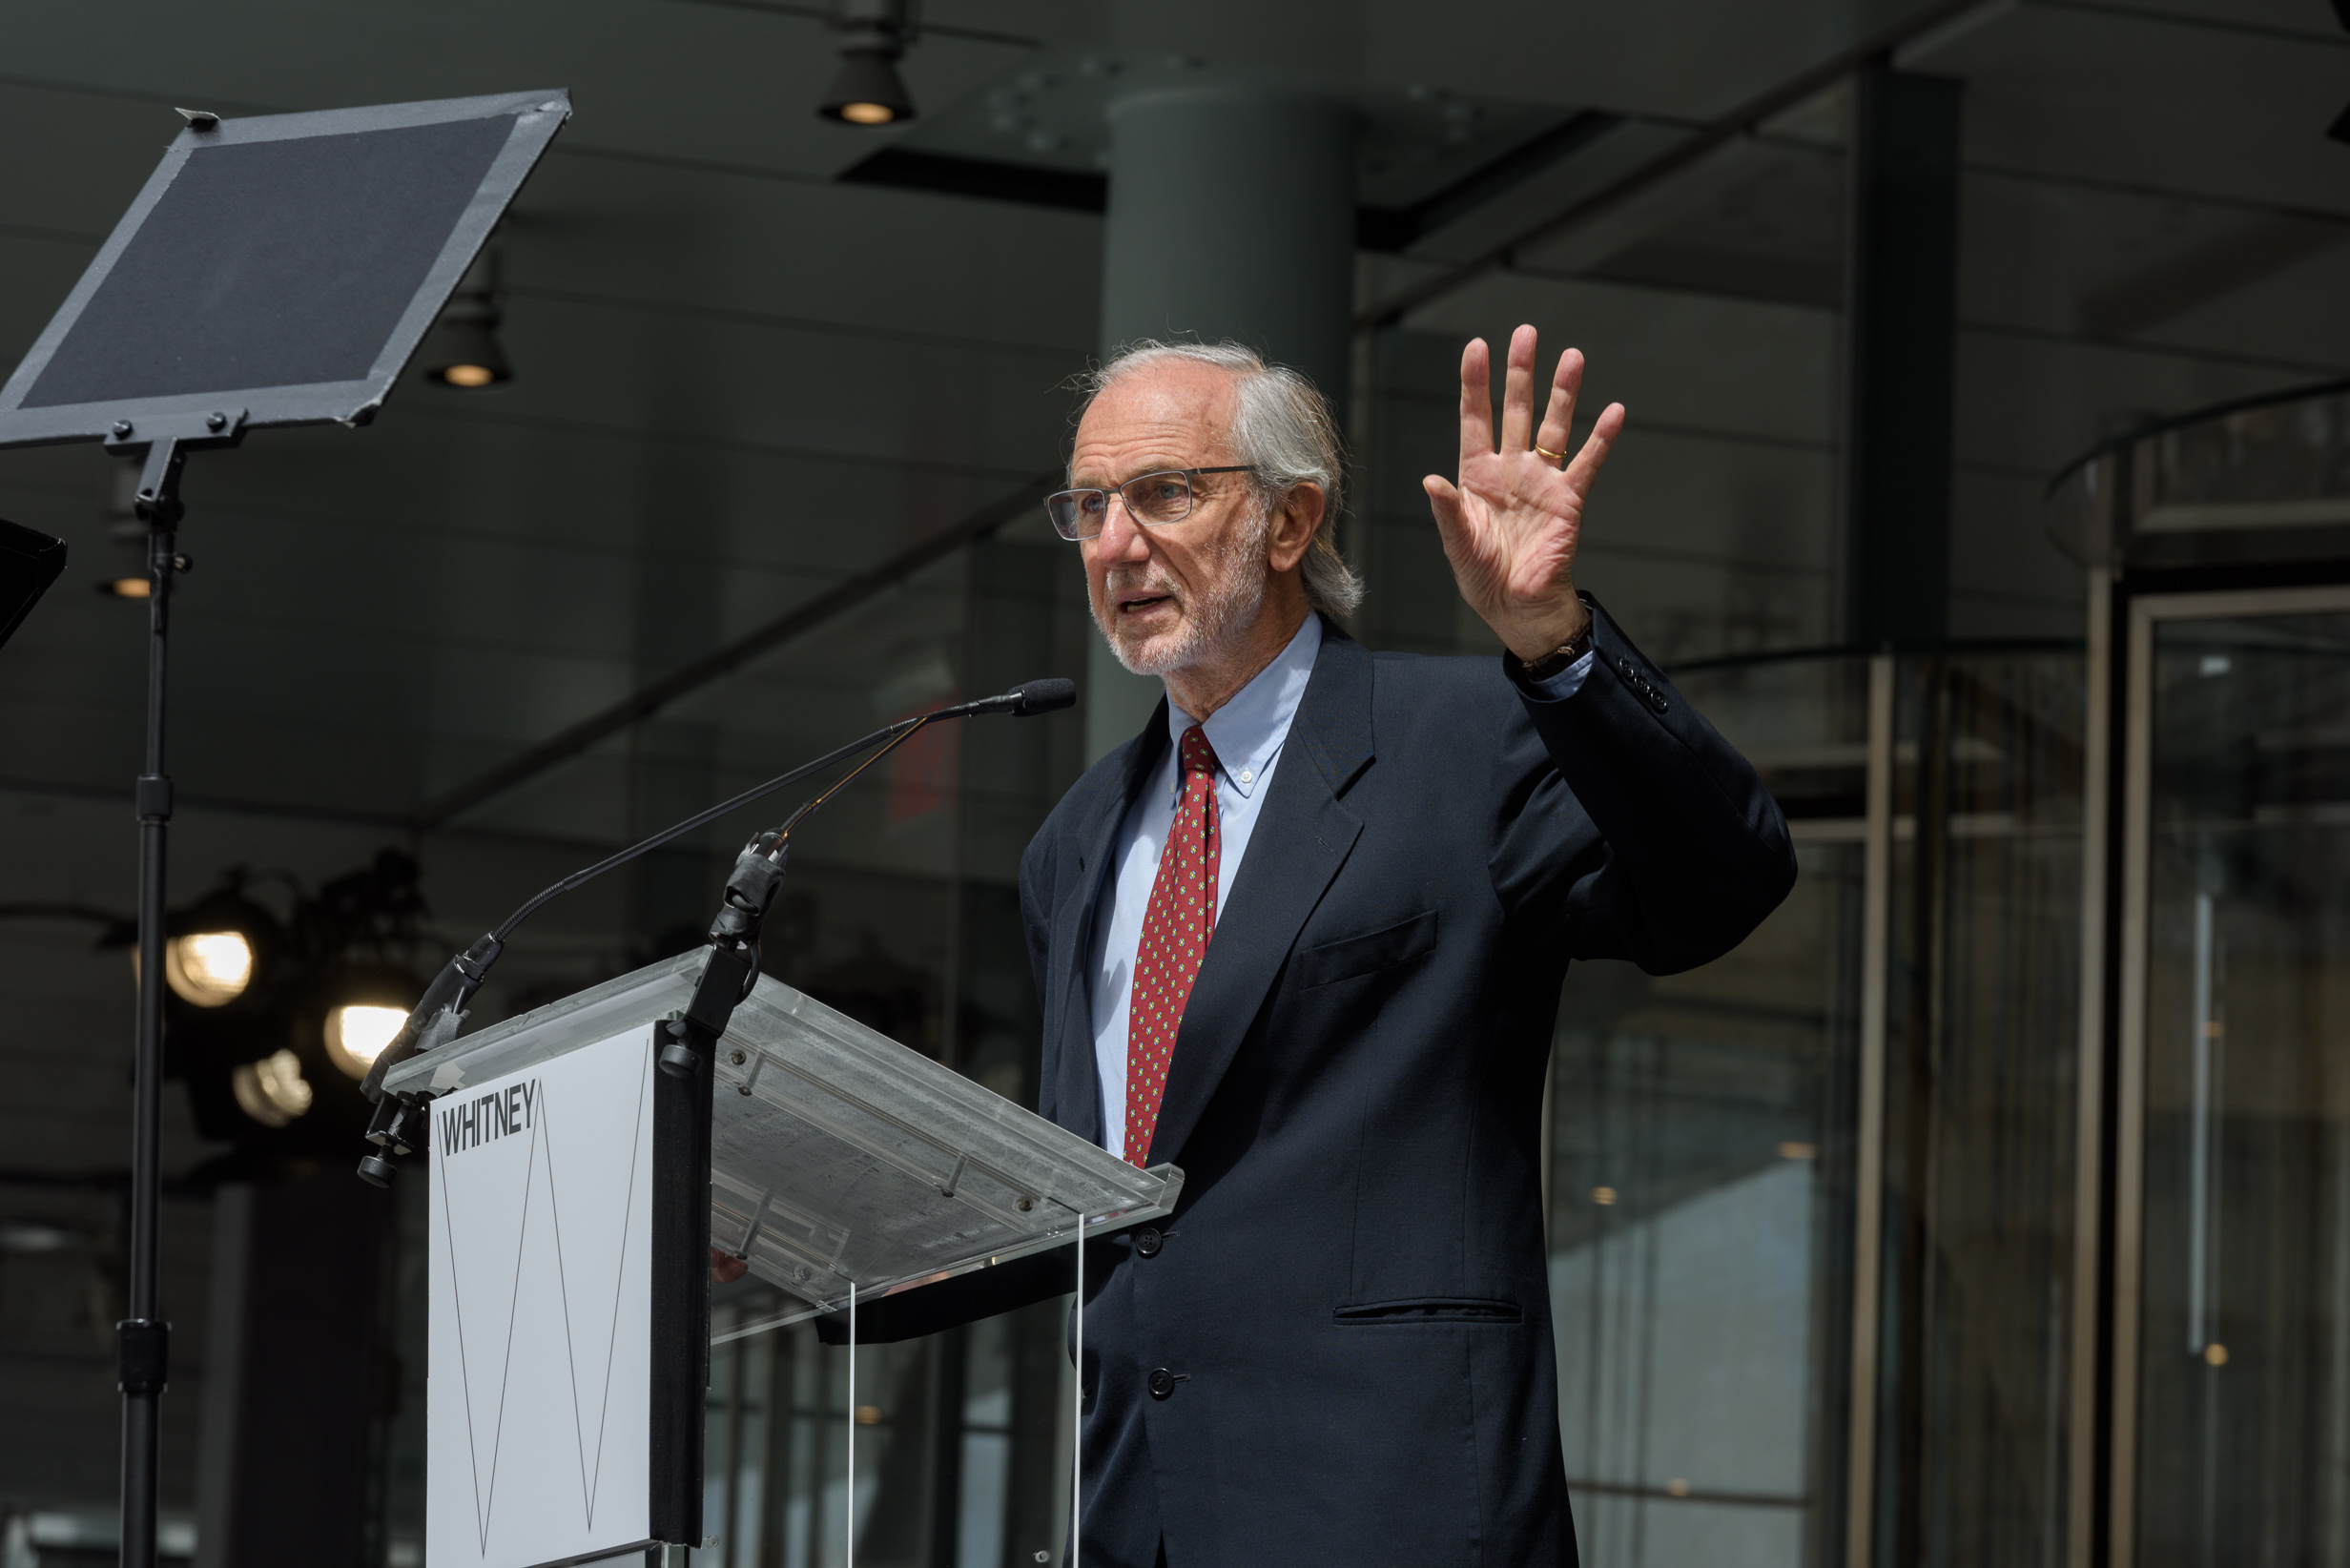 Architect Renzo Piano described the design of the new museum as ’flying.’